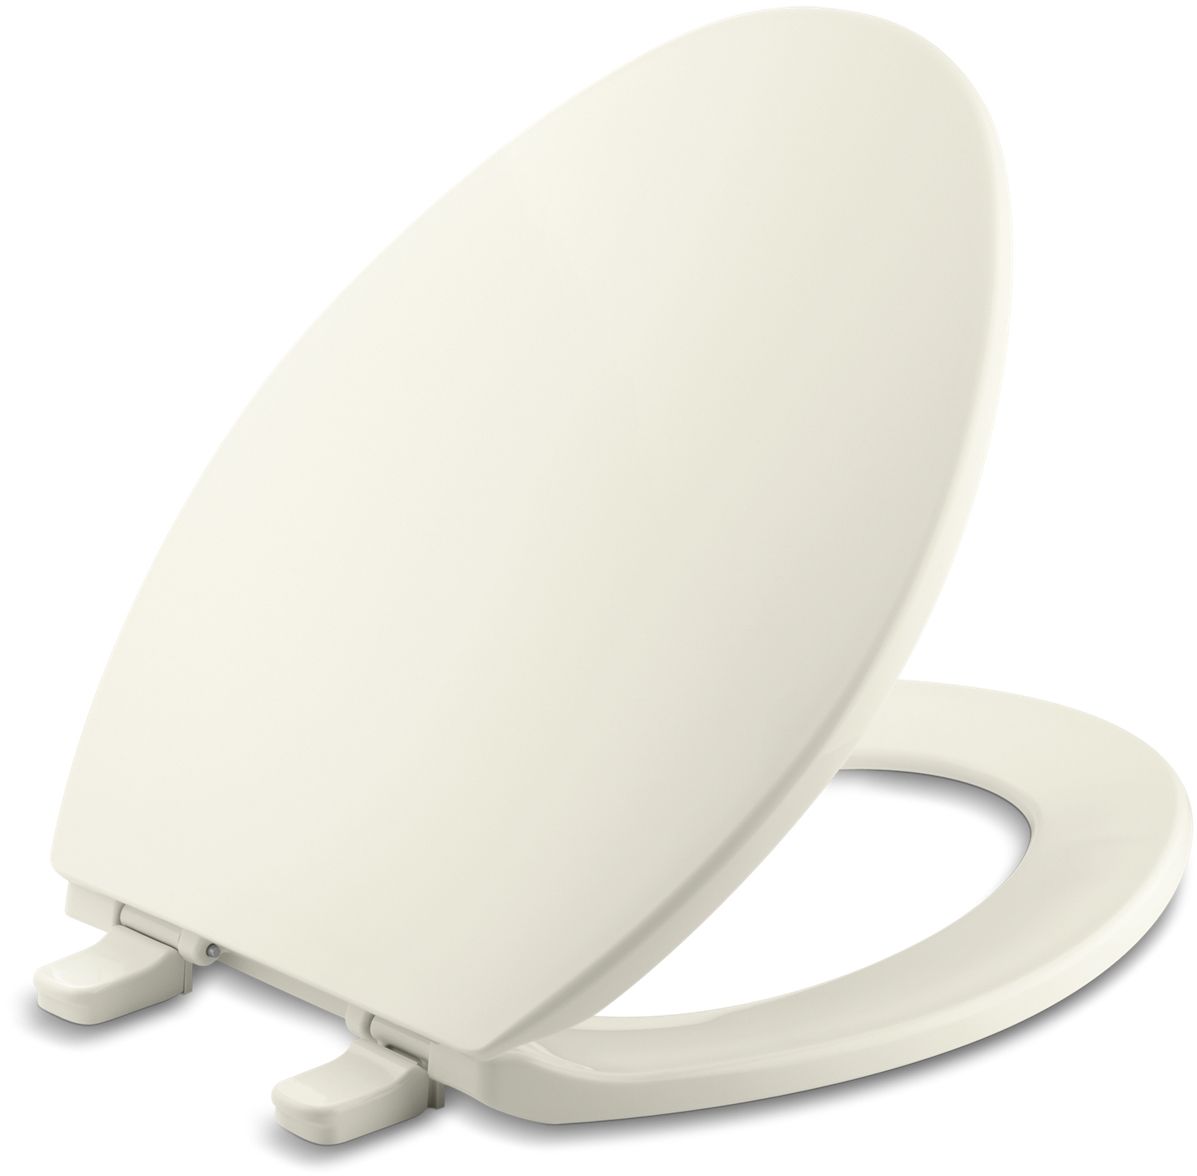 Biscuit Kohler K-4774-96 Brevia With Quick-Release Hinges Elongated Toilet Seat 